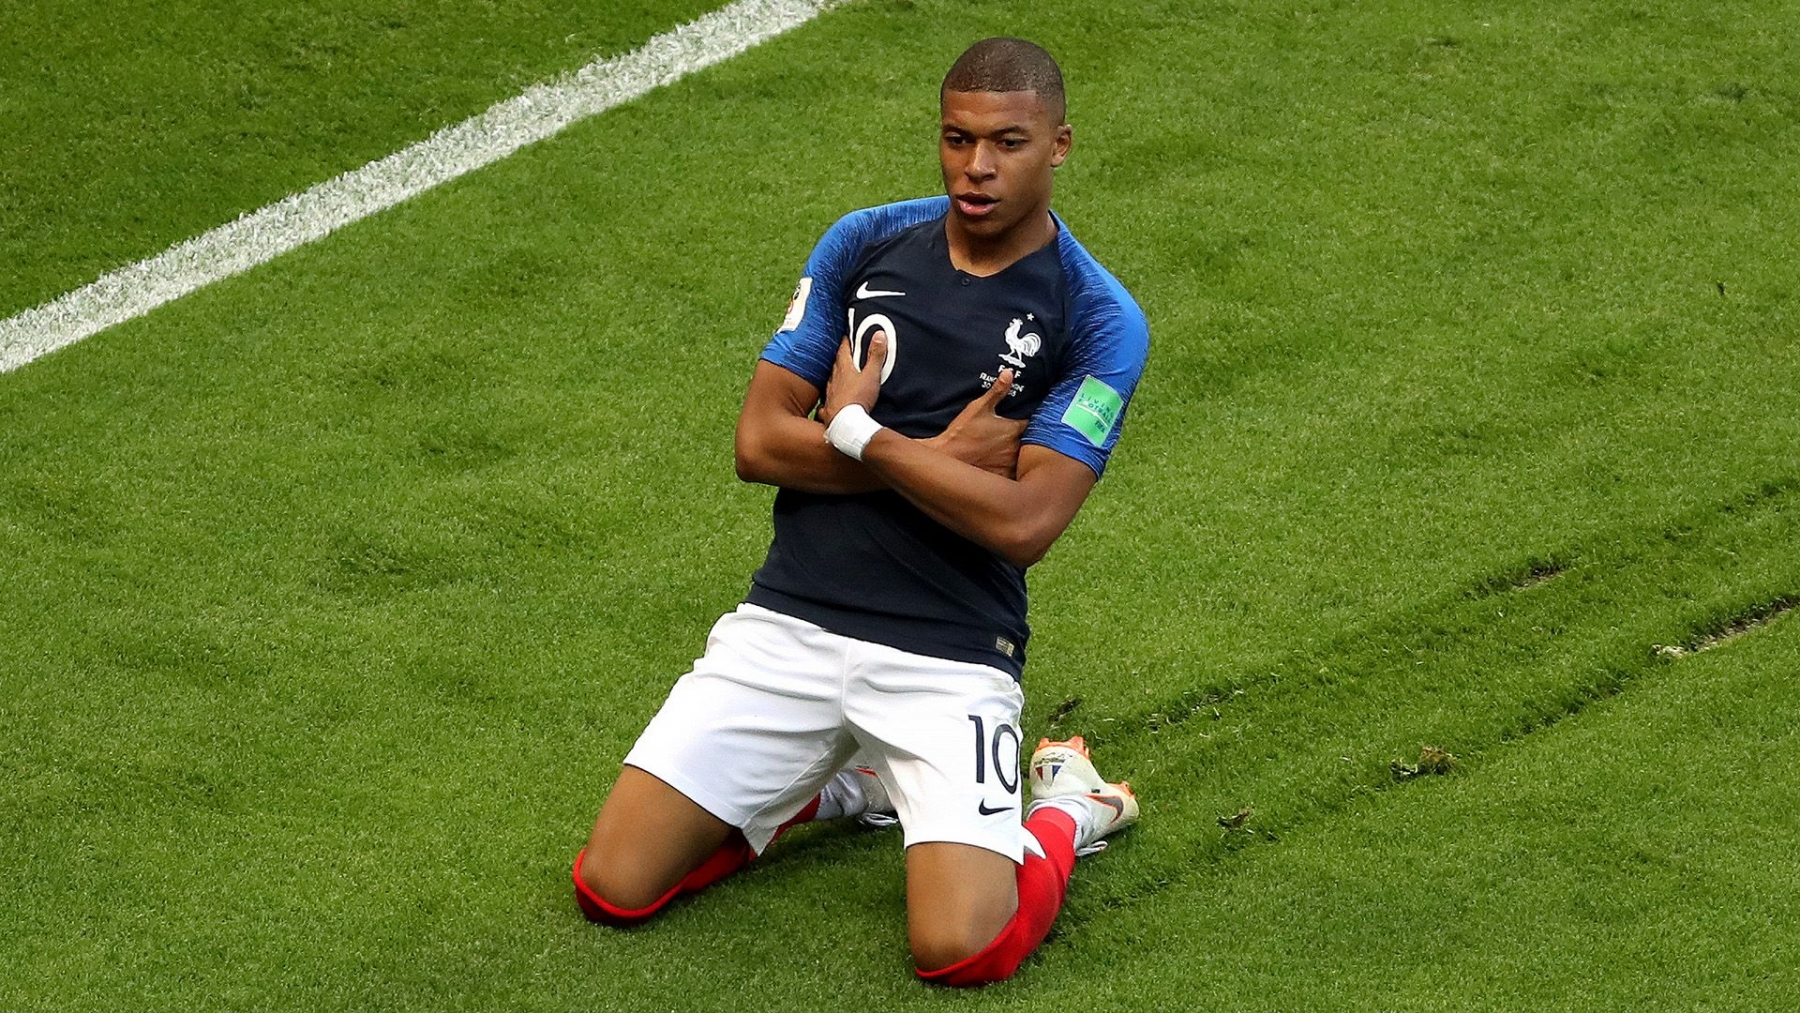 Kylian Mbappé 2019 France Wallpapers and Background Images – YL Computing